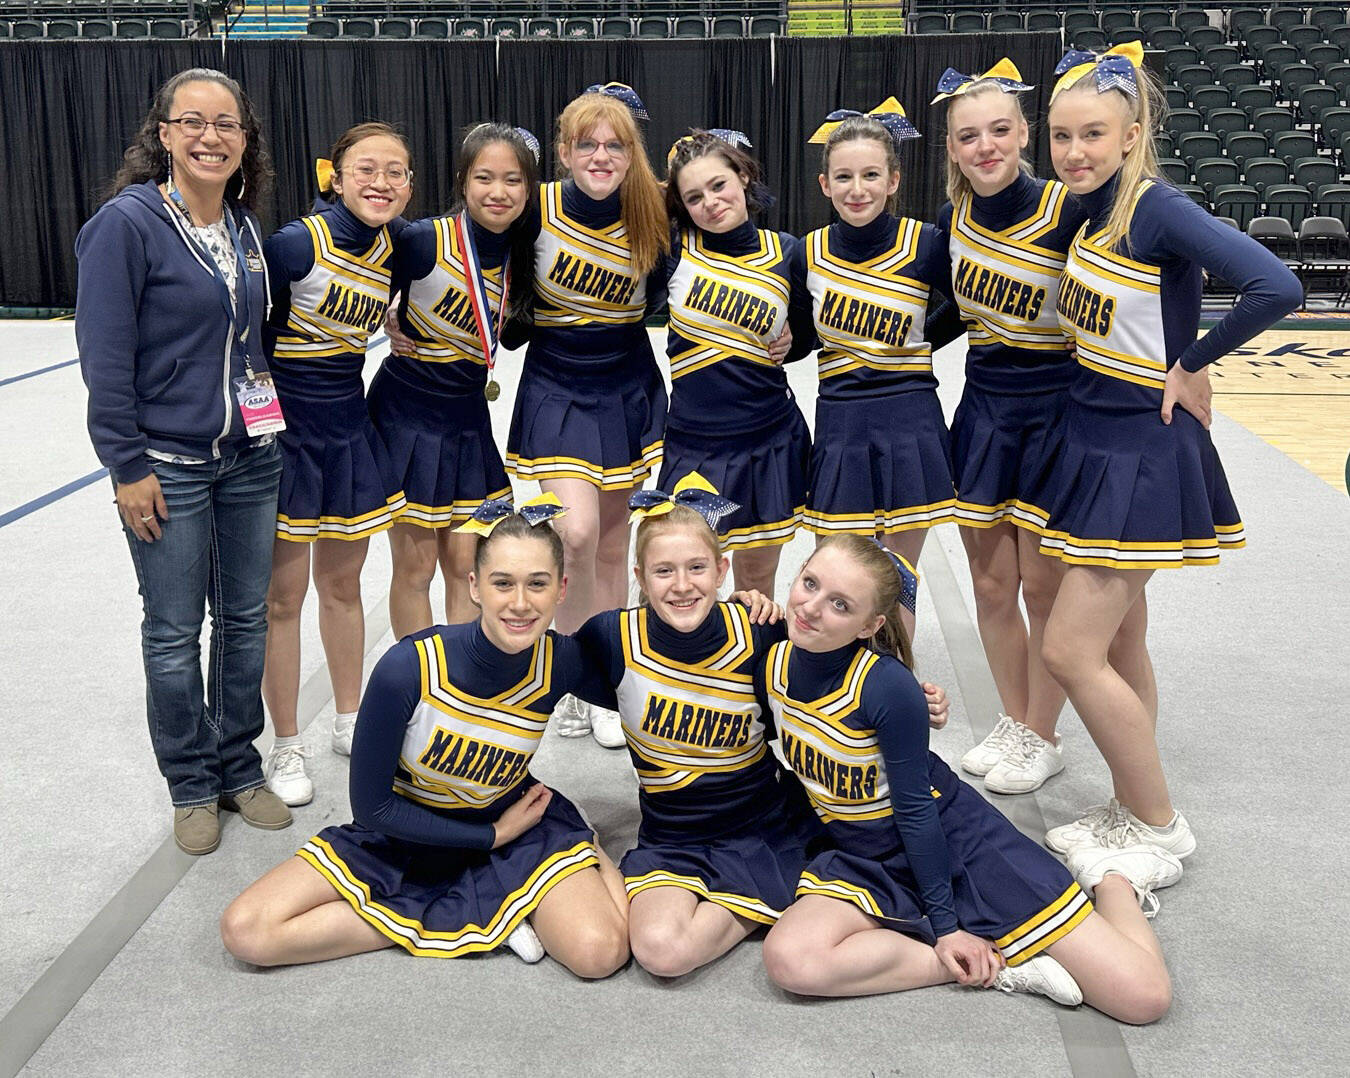 The Homer cheerleading squad. Front row, left to right: Thea James, Hannah Klima and Taylor Fraley. Back row, left to row: Head coach Winter Marshall-Allen, Tuong Thi Cat Tran, Sameah McGhee, Mari Brewer-Cote, Lynnzi Stout-Dee, Ellen Barrett, Ally High and Dorothea Hanenberger. Not pictured: Faith Latham, Nikole Drake and Angelynn Webb. (Photo provided)